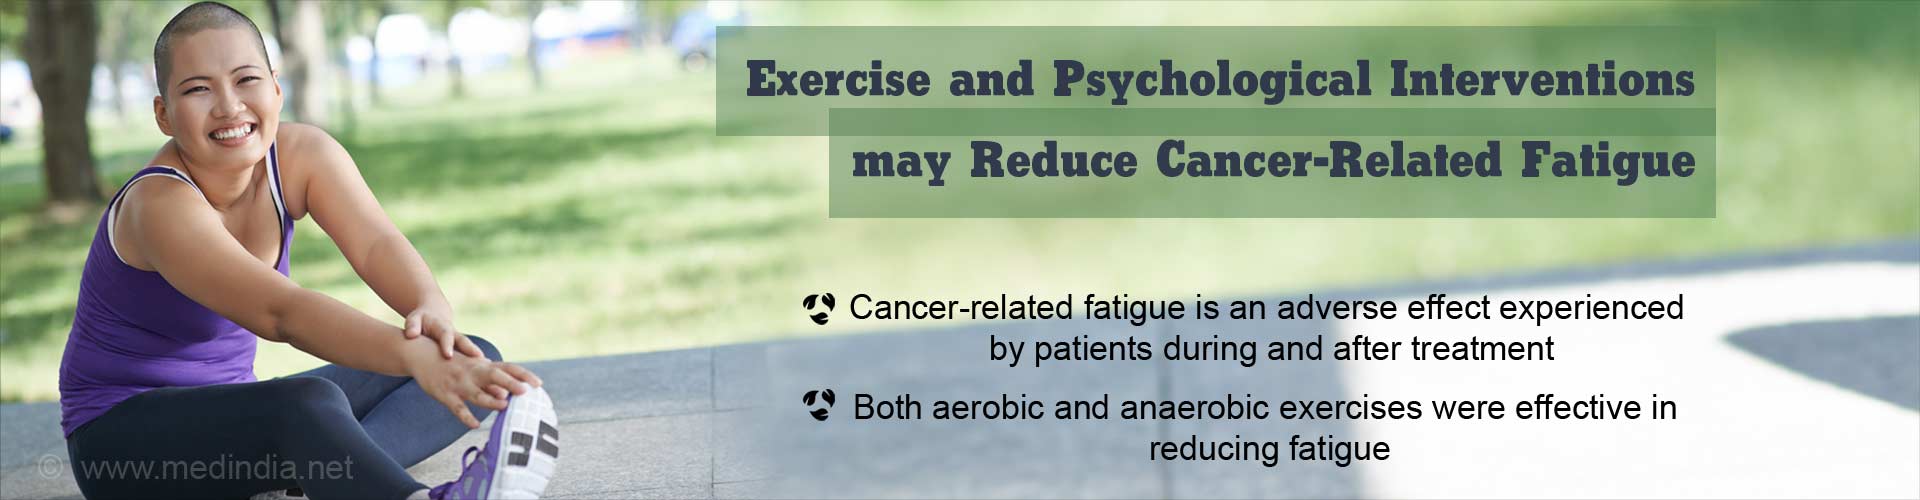 Exercise and psychological interventions may reduce cancer-related fatigue
- cancer-related fatigue is an adverse effect experienced by patients during and after treatment
- both aerobic and anaerobic exercises were effective in reducing fatigue